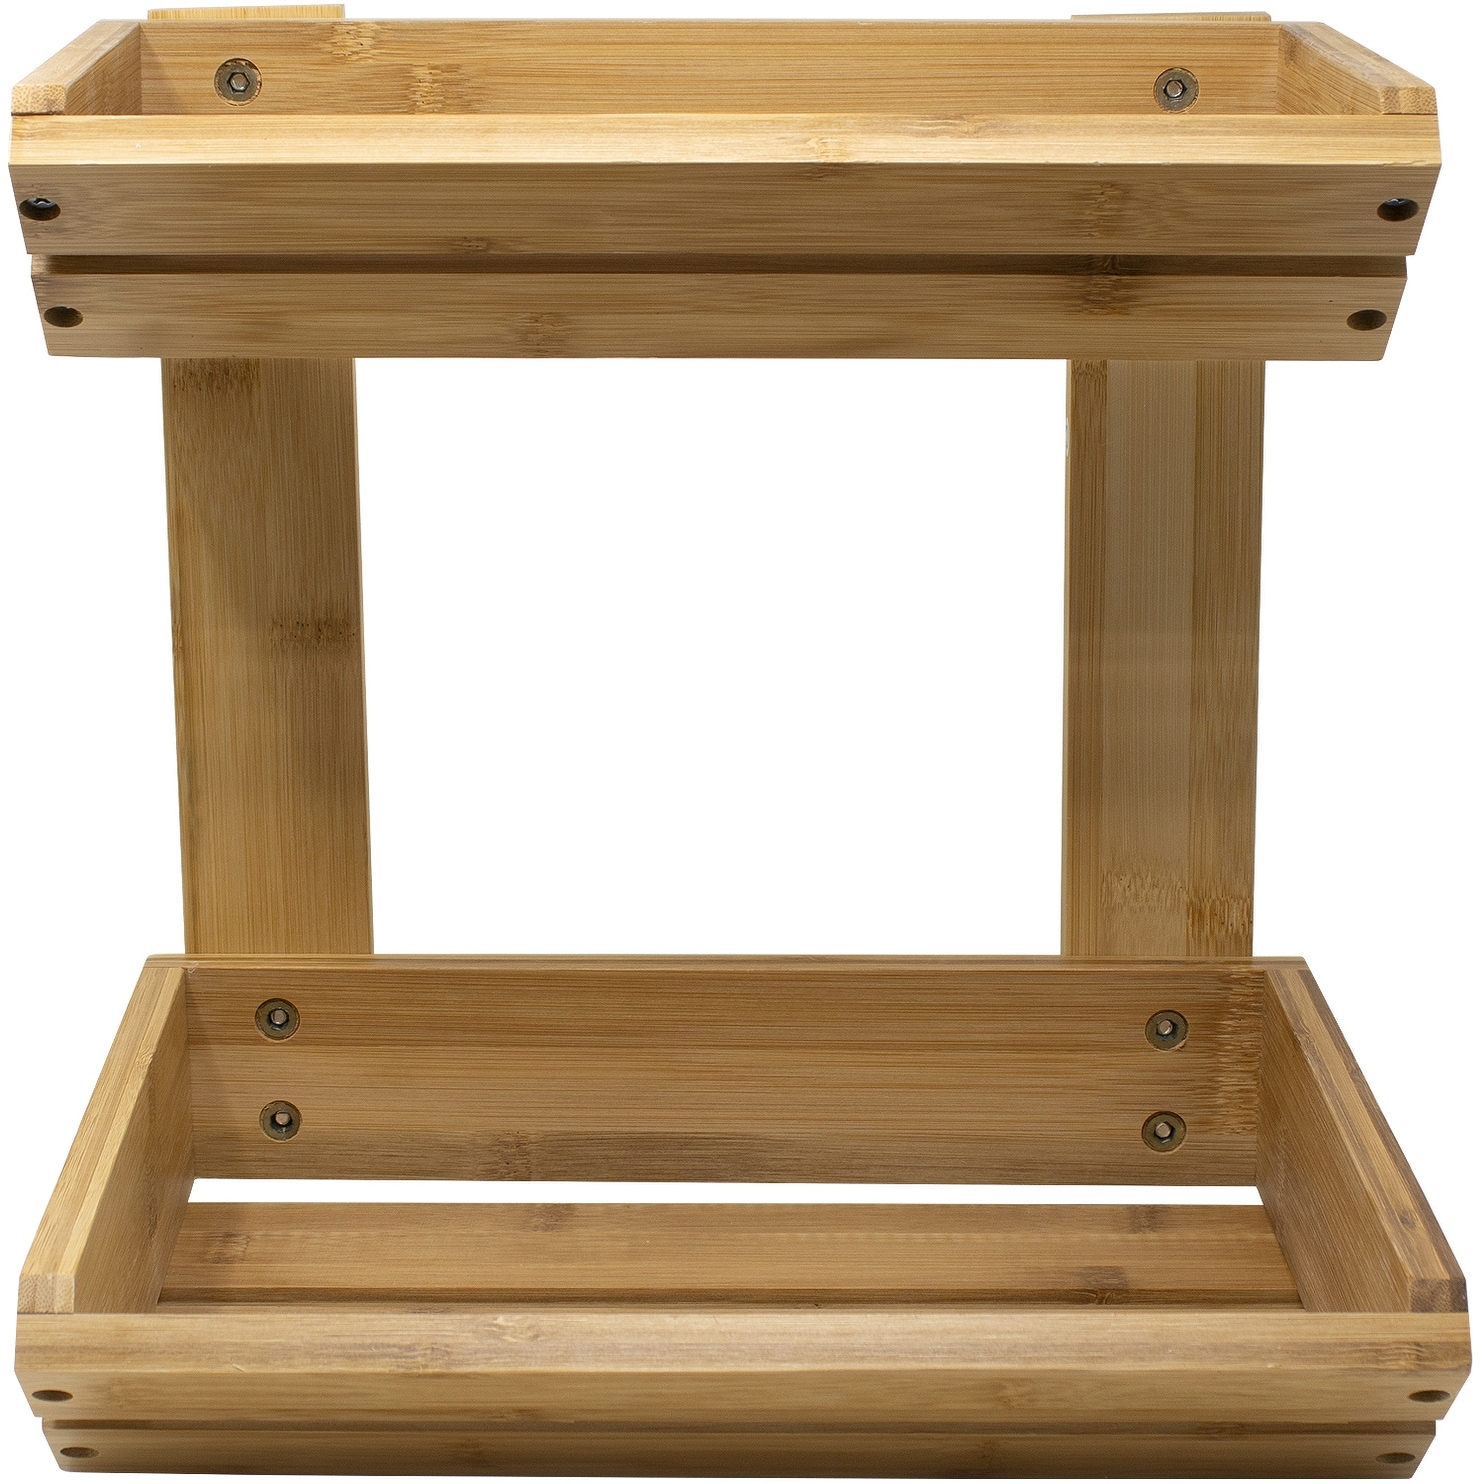 Bamboo Fruit Vegetable Basket Kitchen Counter Stand 2-Tier Storage